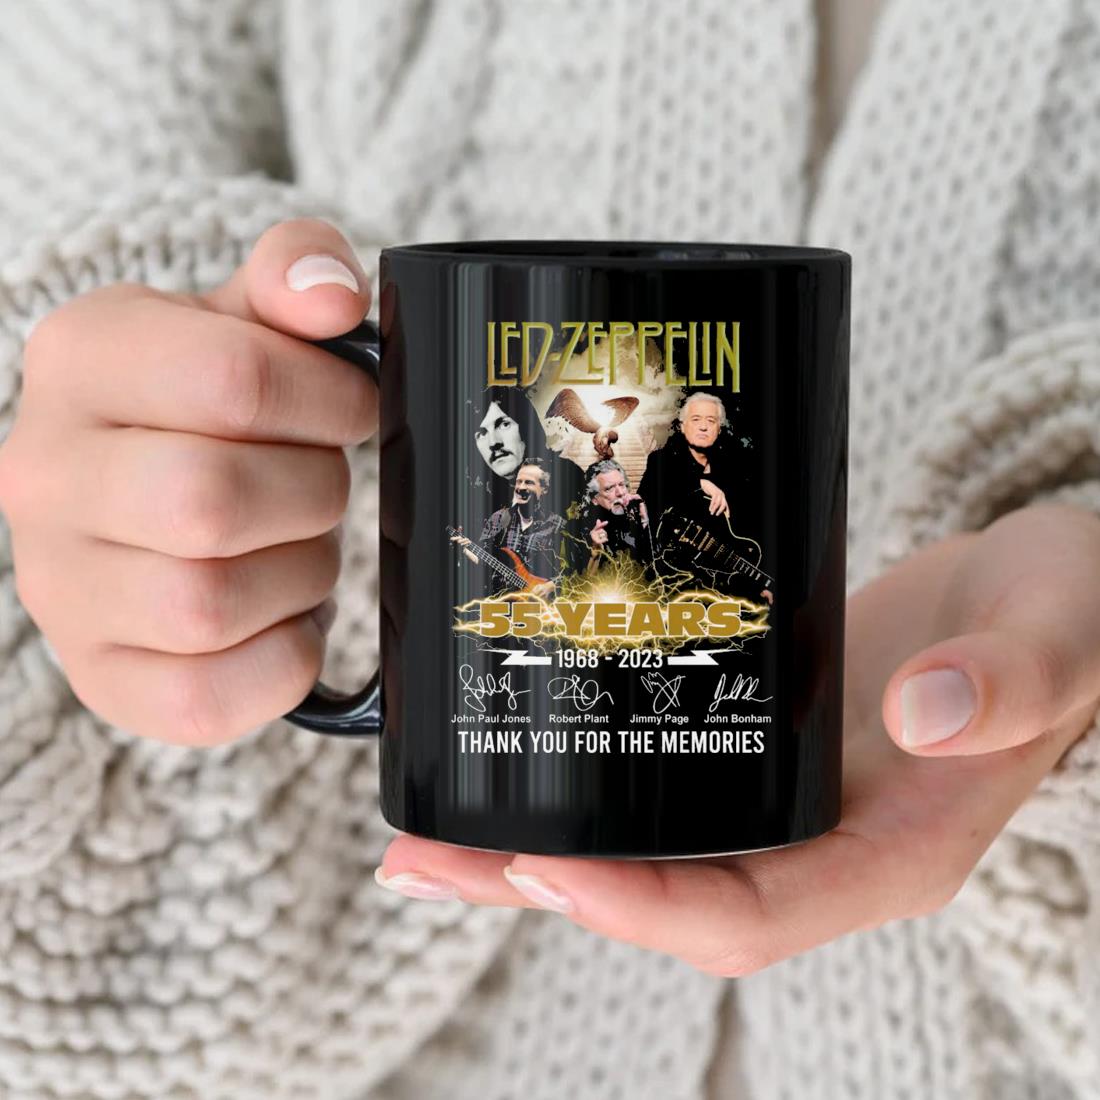 Led Zeppelin 55 Years 1968-2023 Thank You For The Memories Signatures Mug